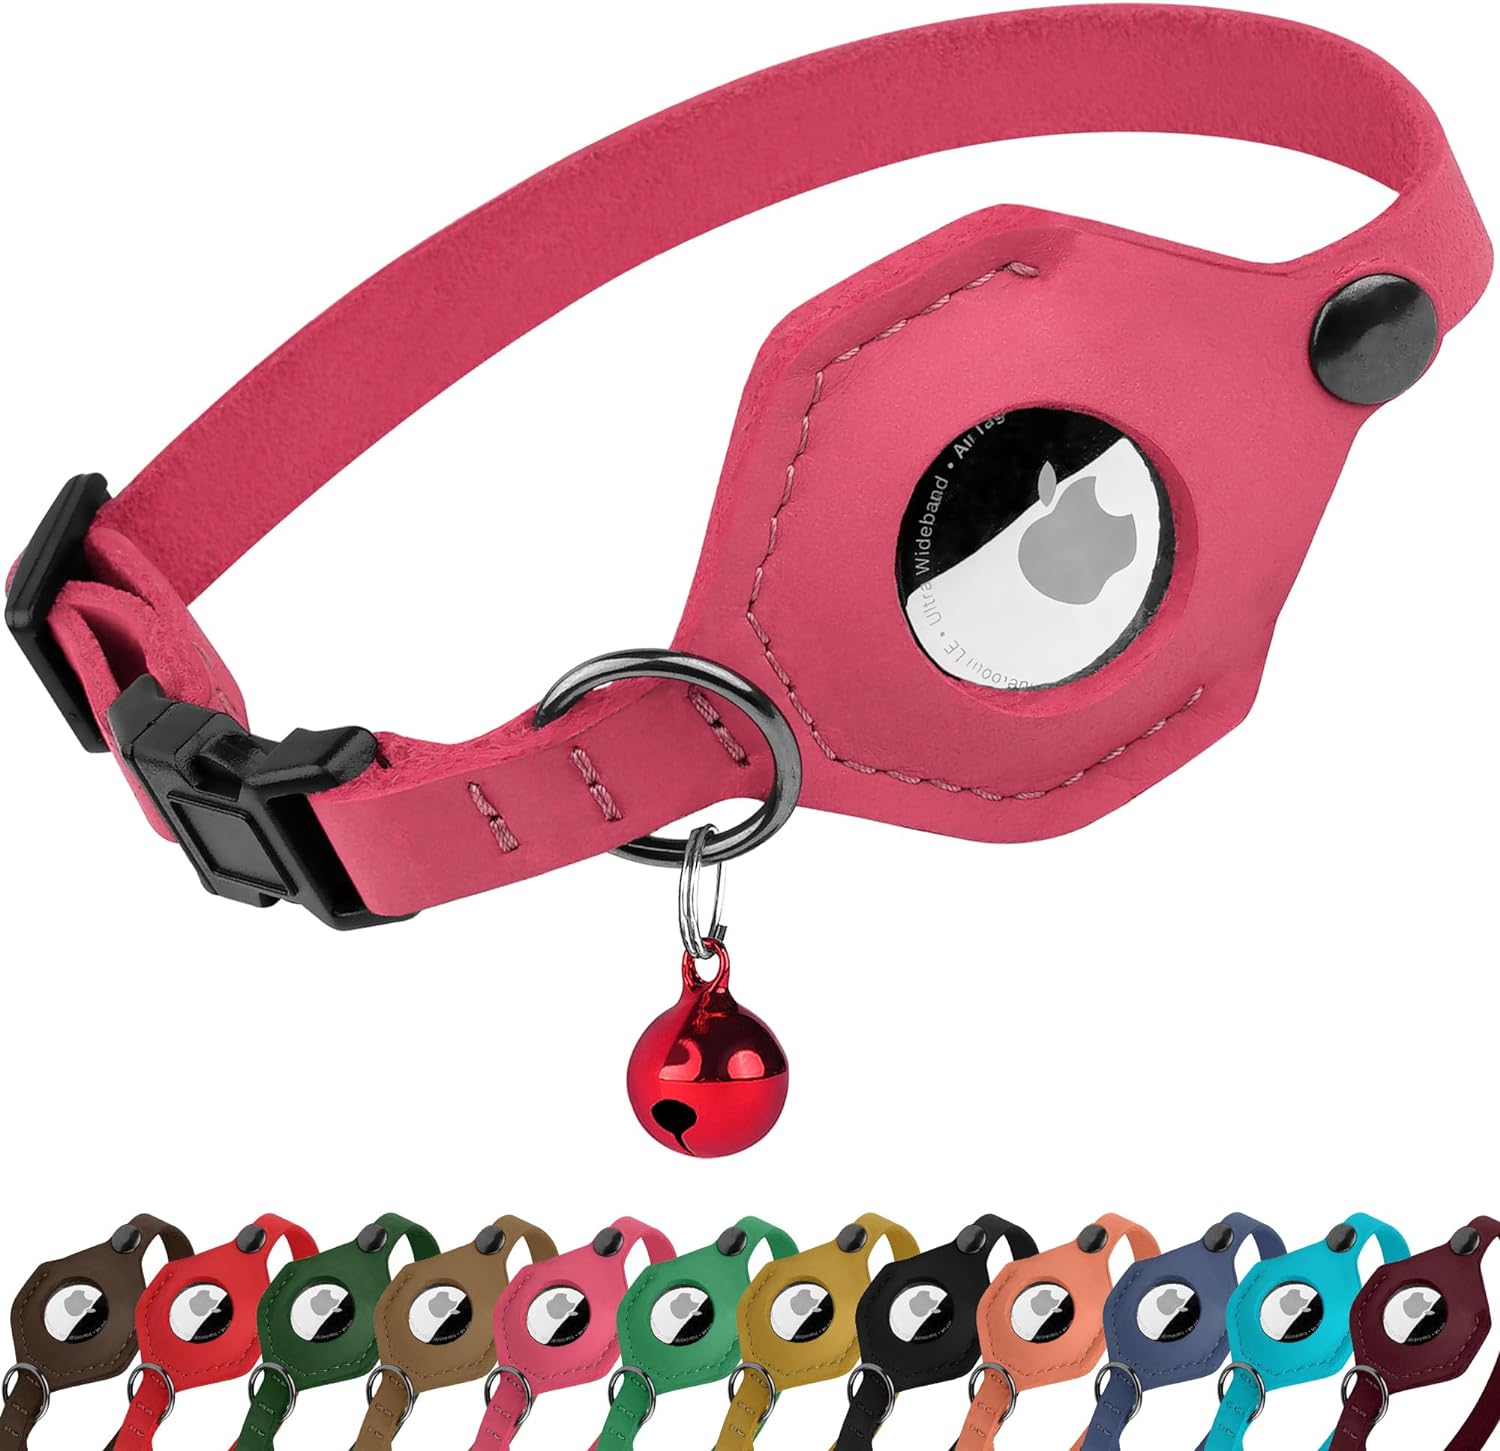 Adjustable Leather Cat Collar with AirTag Holder - Breakaway Design with Bell - Abbycart